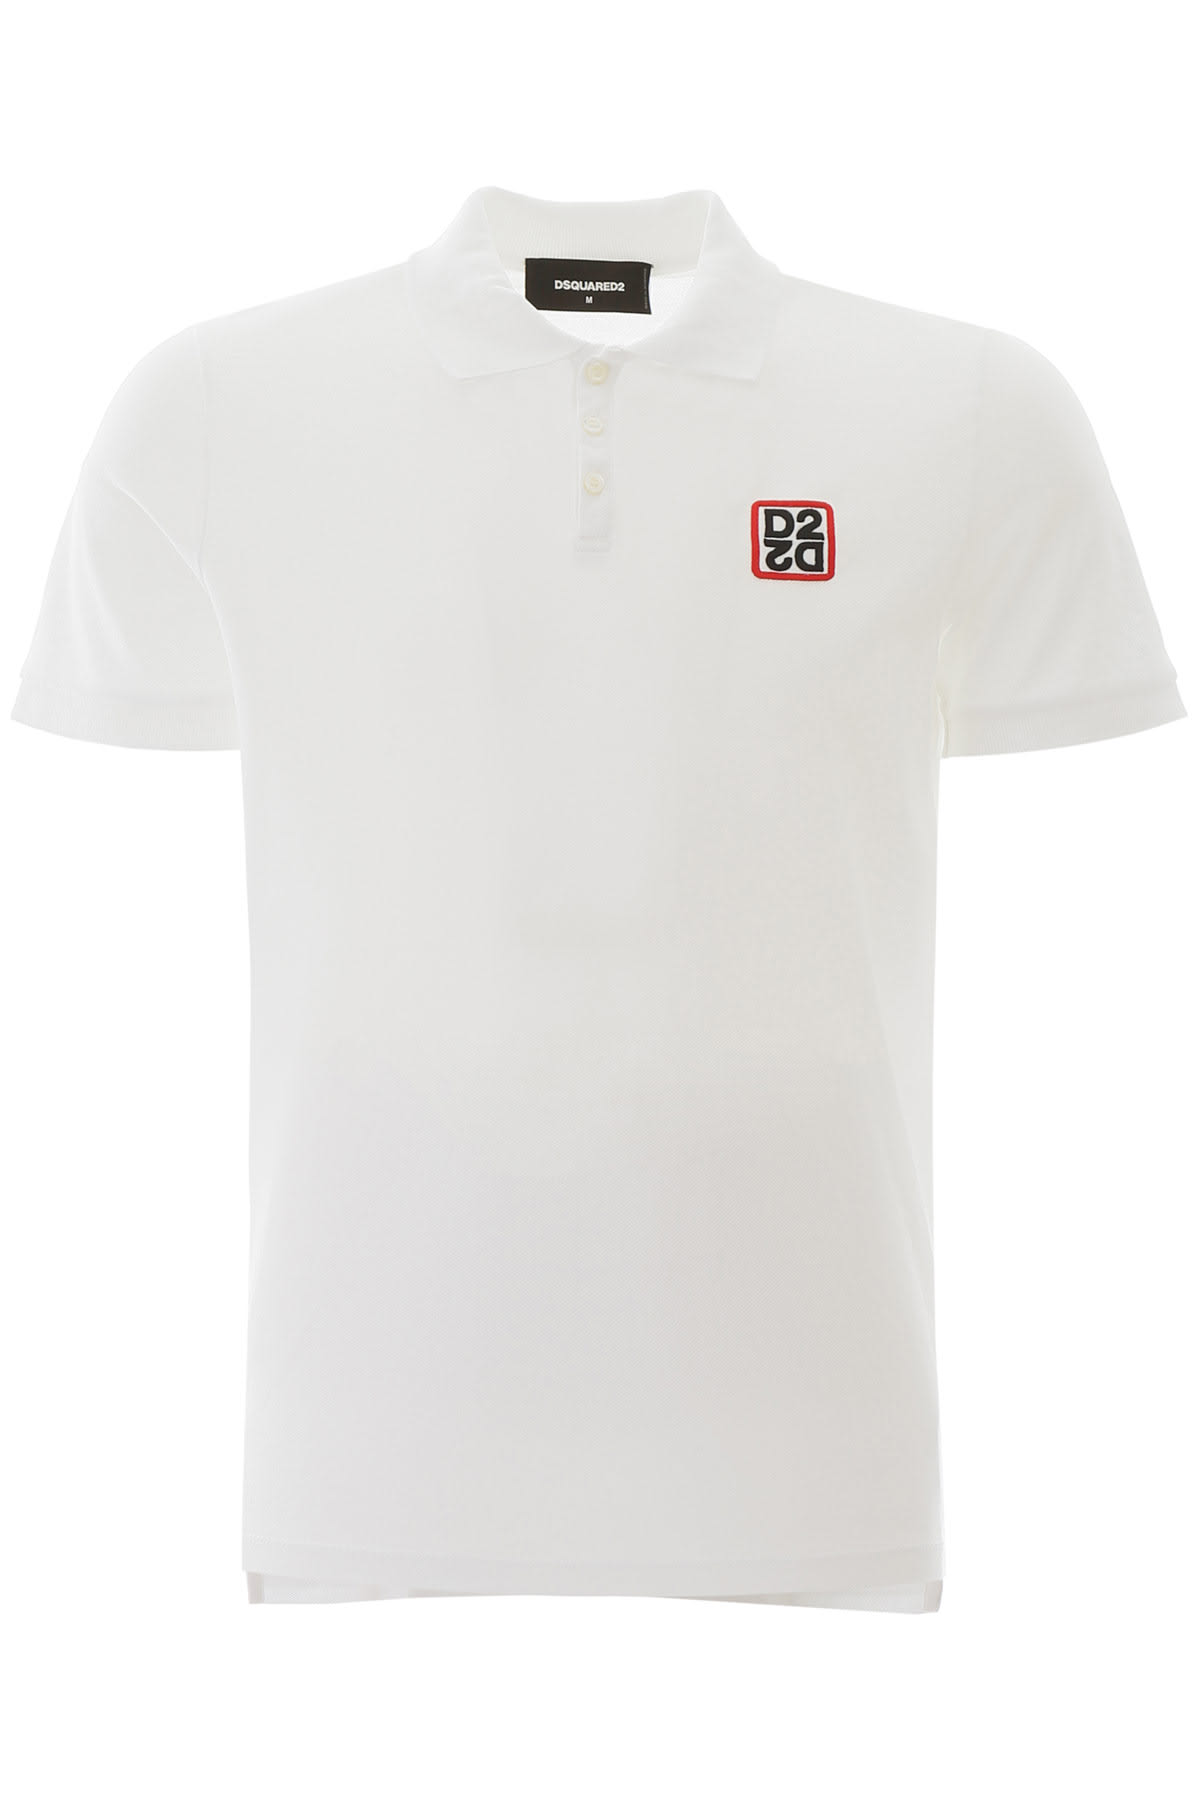 dsquared polo top